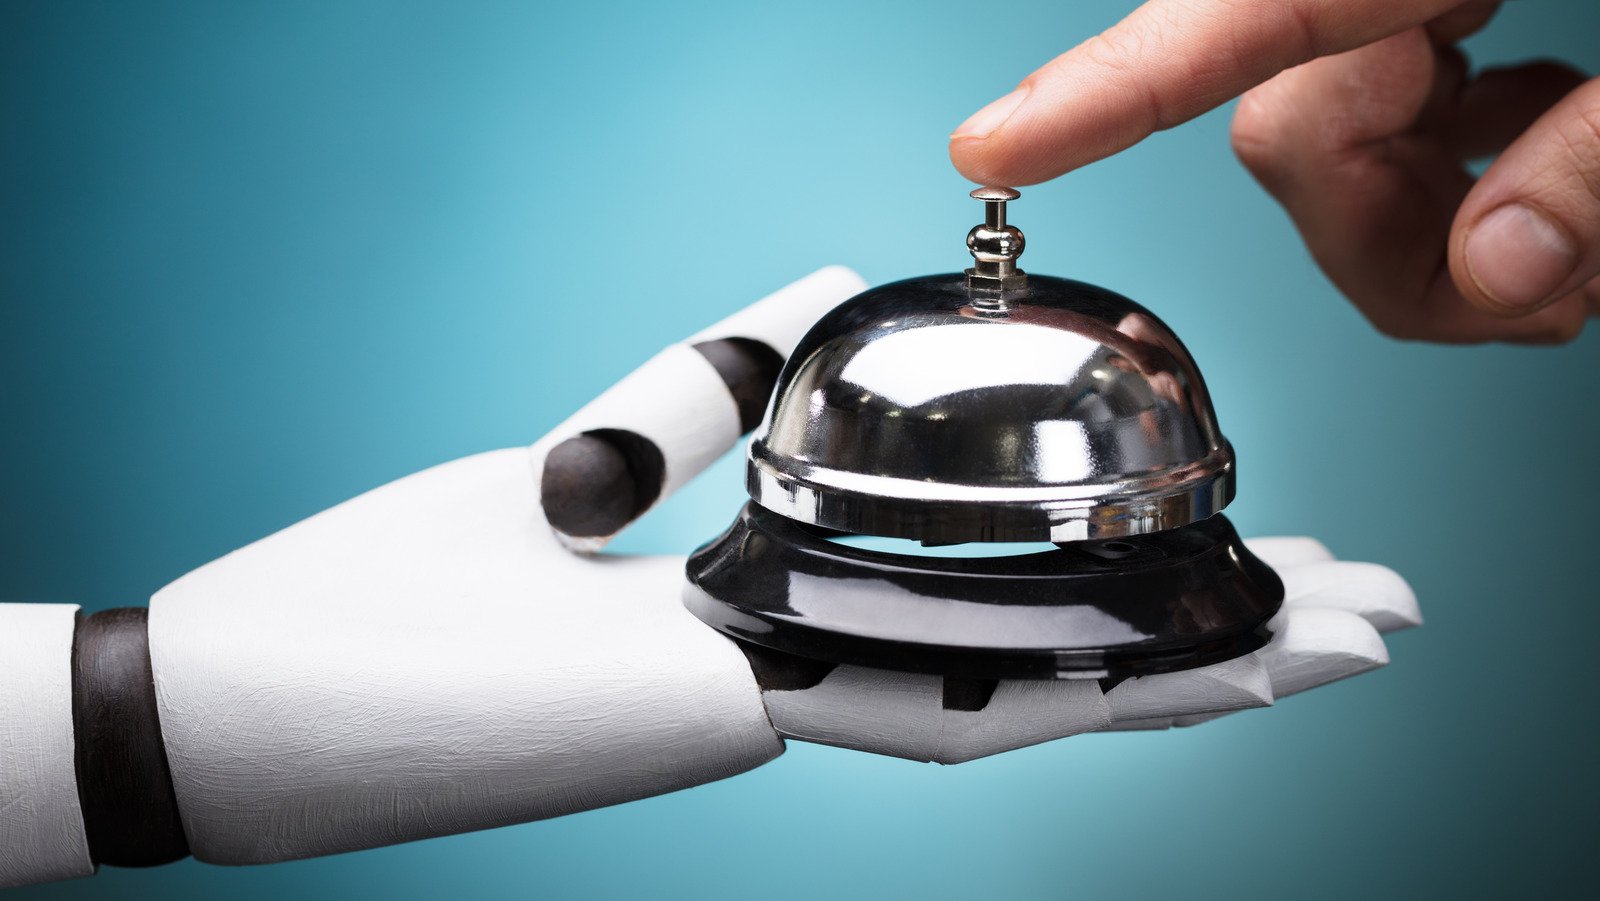 The Reason Some People Aren't Thrilled With Robot-Run Hotels